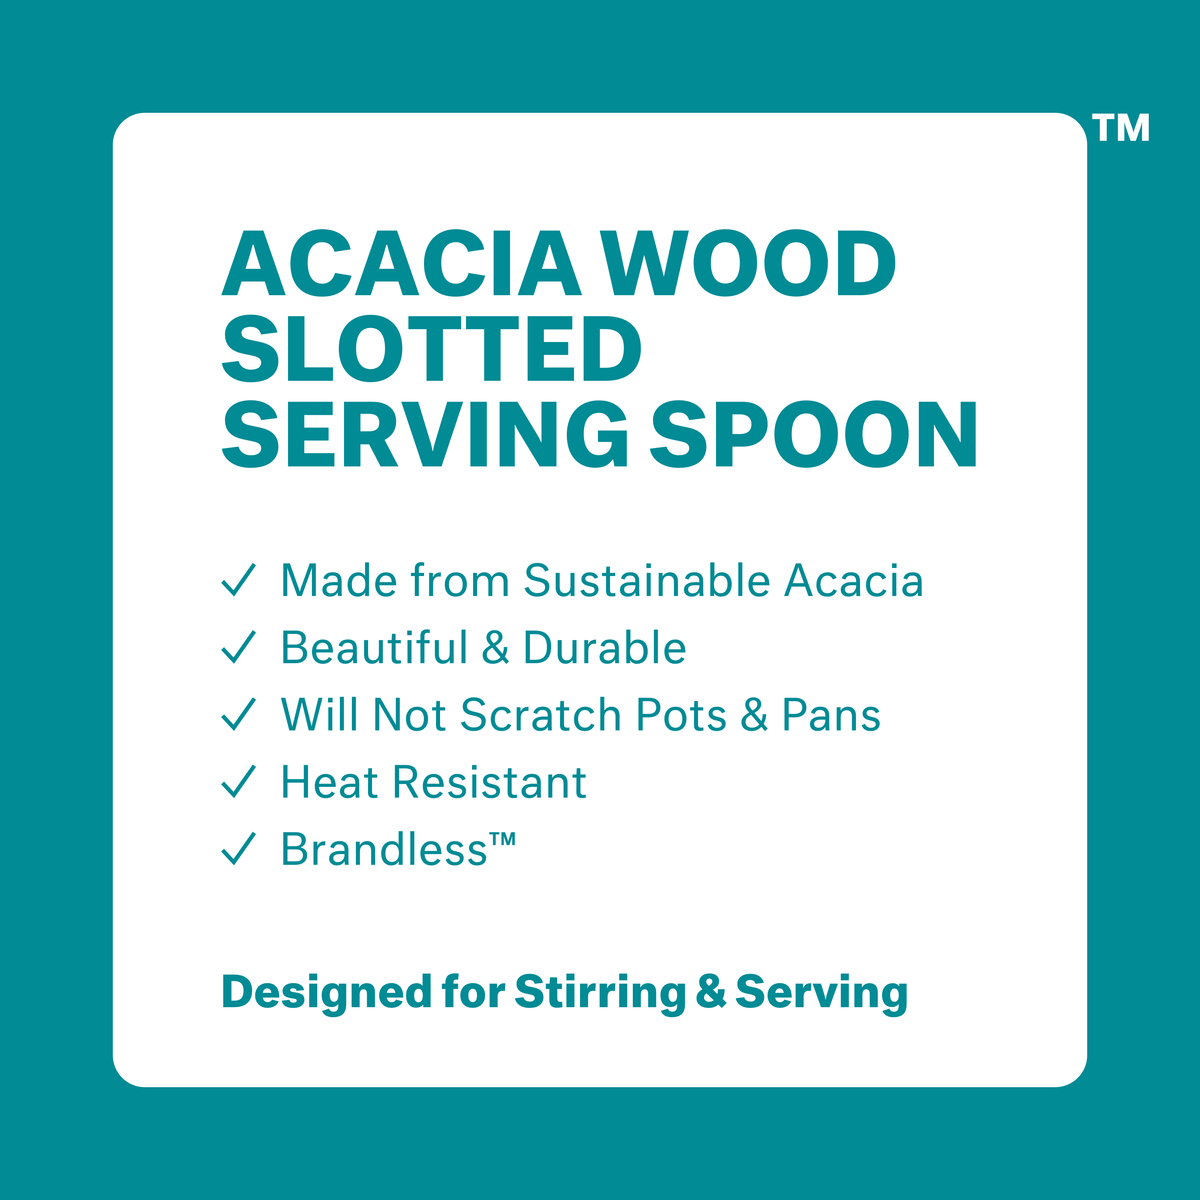 Acacia Wood Slotted Serving Spoon: made from sustainable acacia, beautiful &amp; durable, will not scratch pots and pans, heat resistant, Brandless. Designed for stirring and serving.